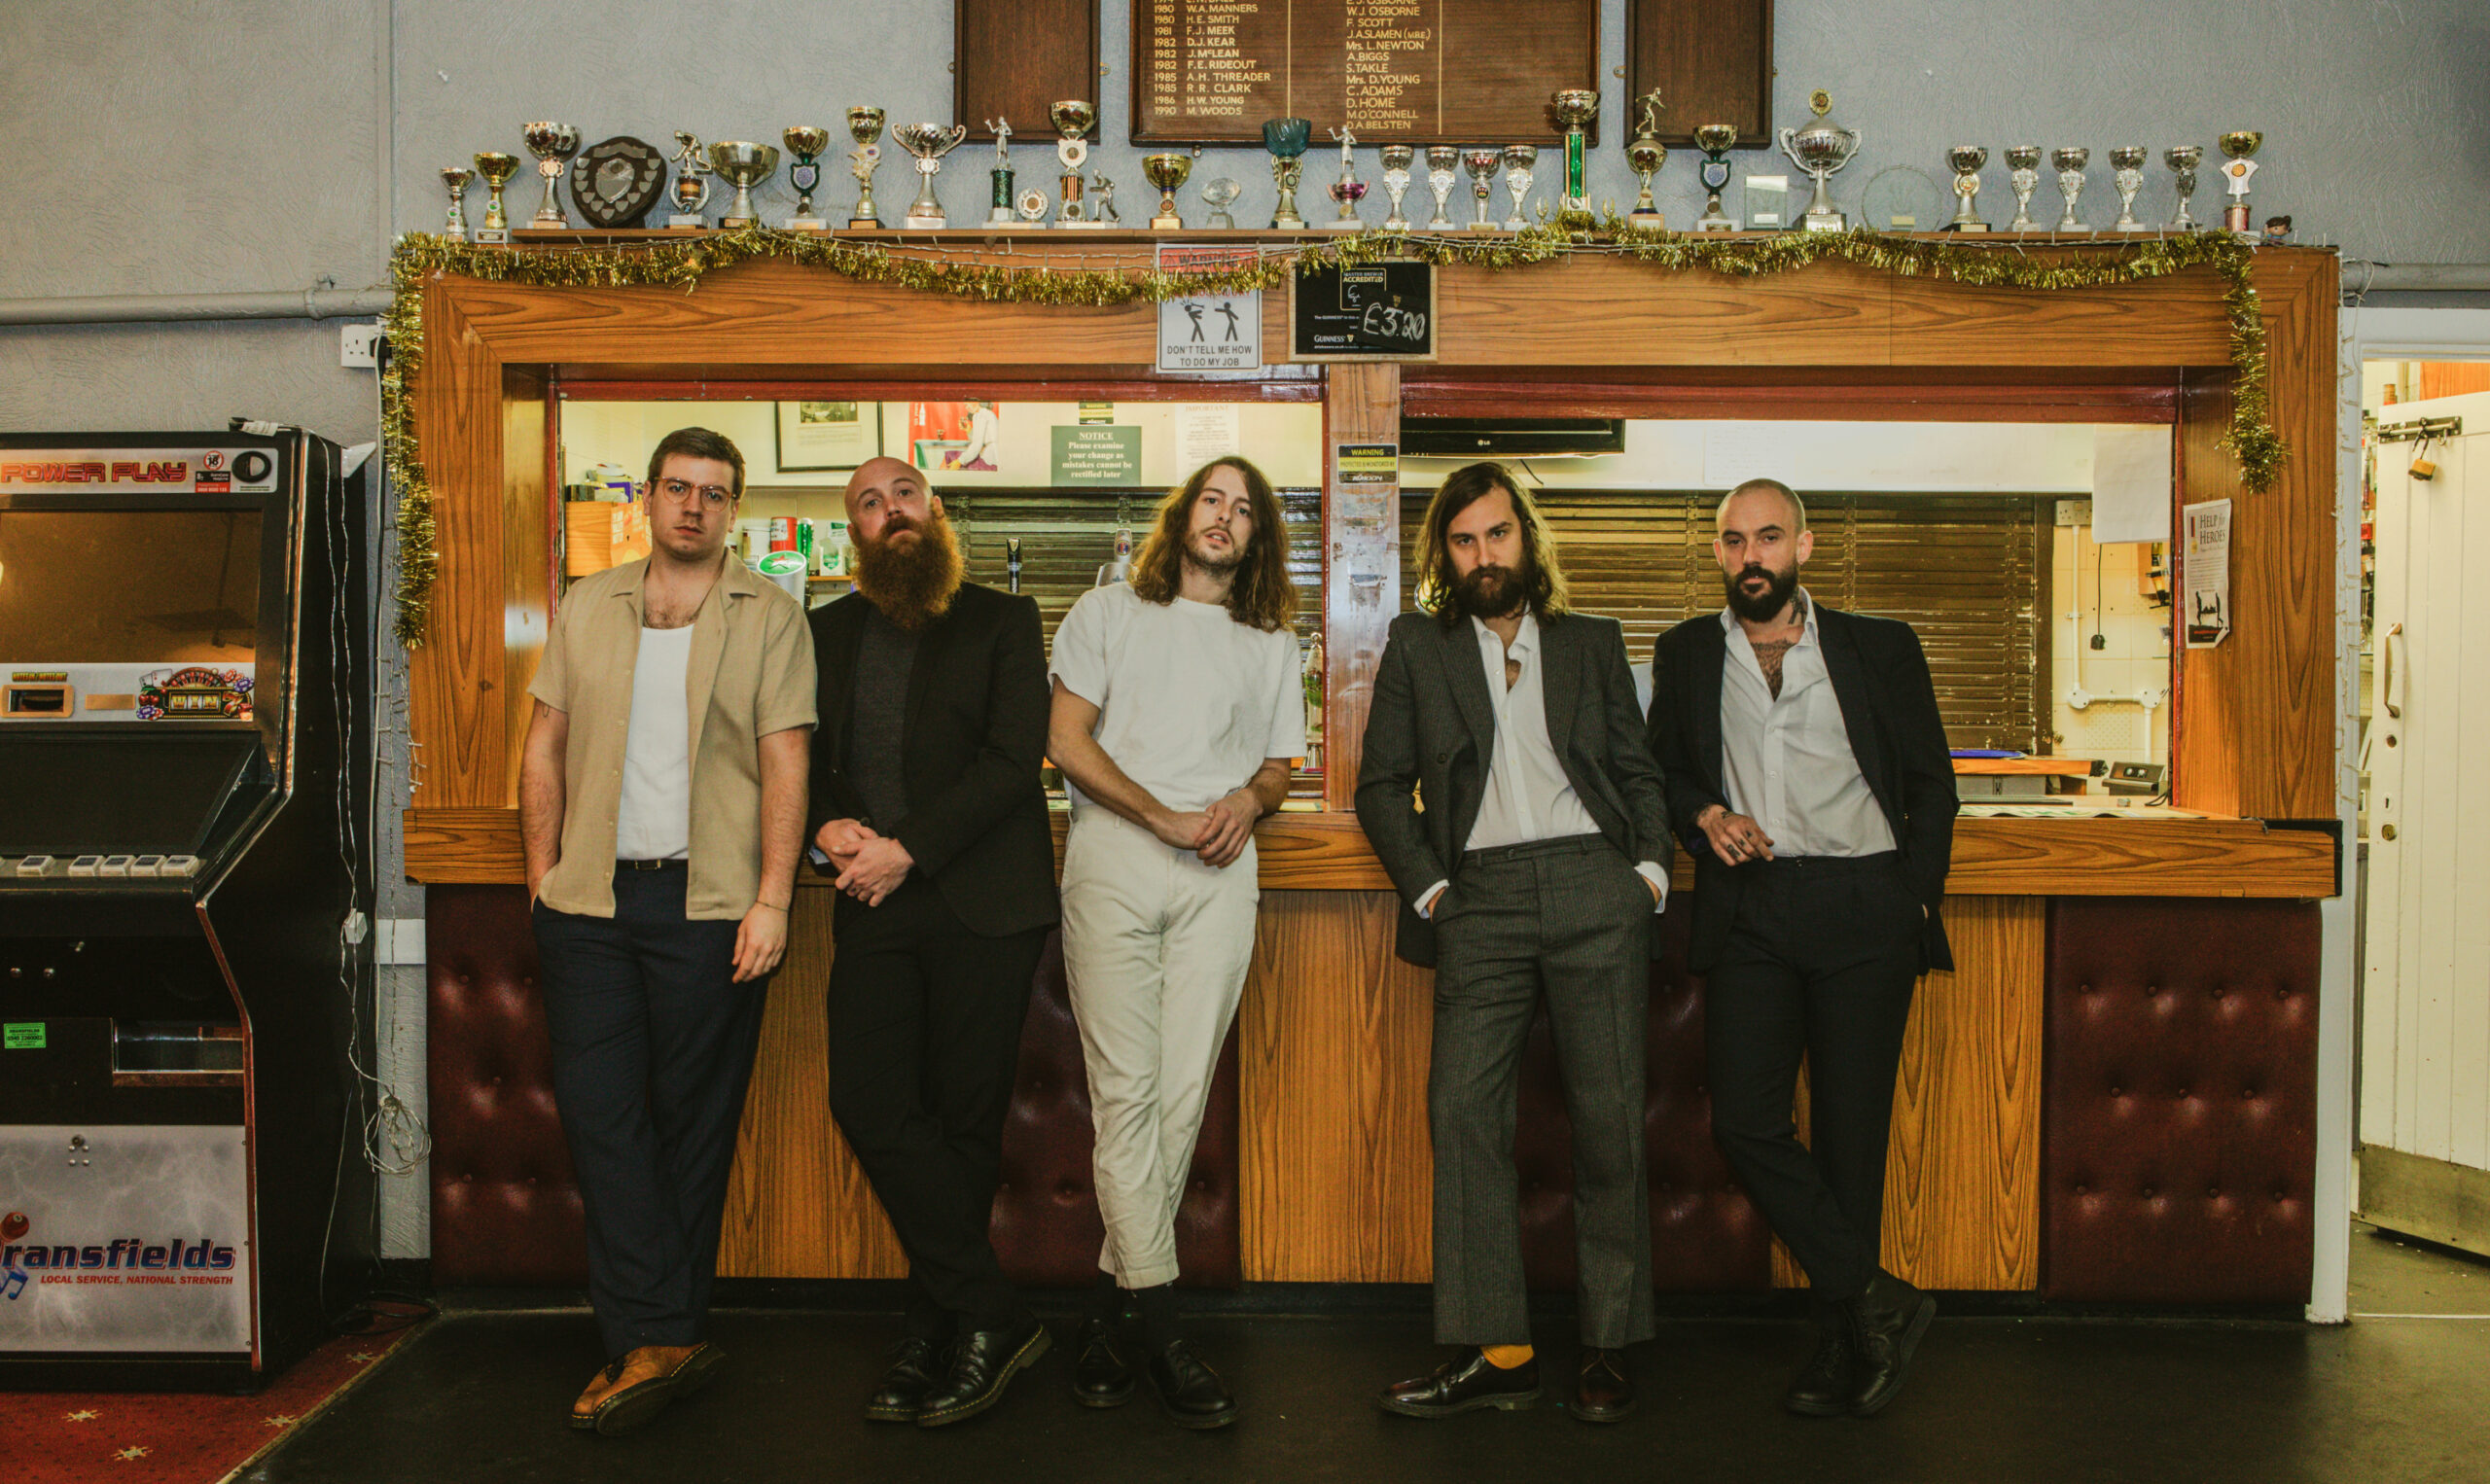 IDLES SHARE NEW SONG + VIDEO – ‘A HYMN’ | OUT NOW